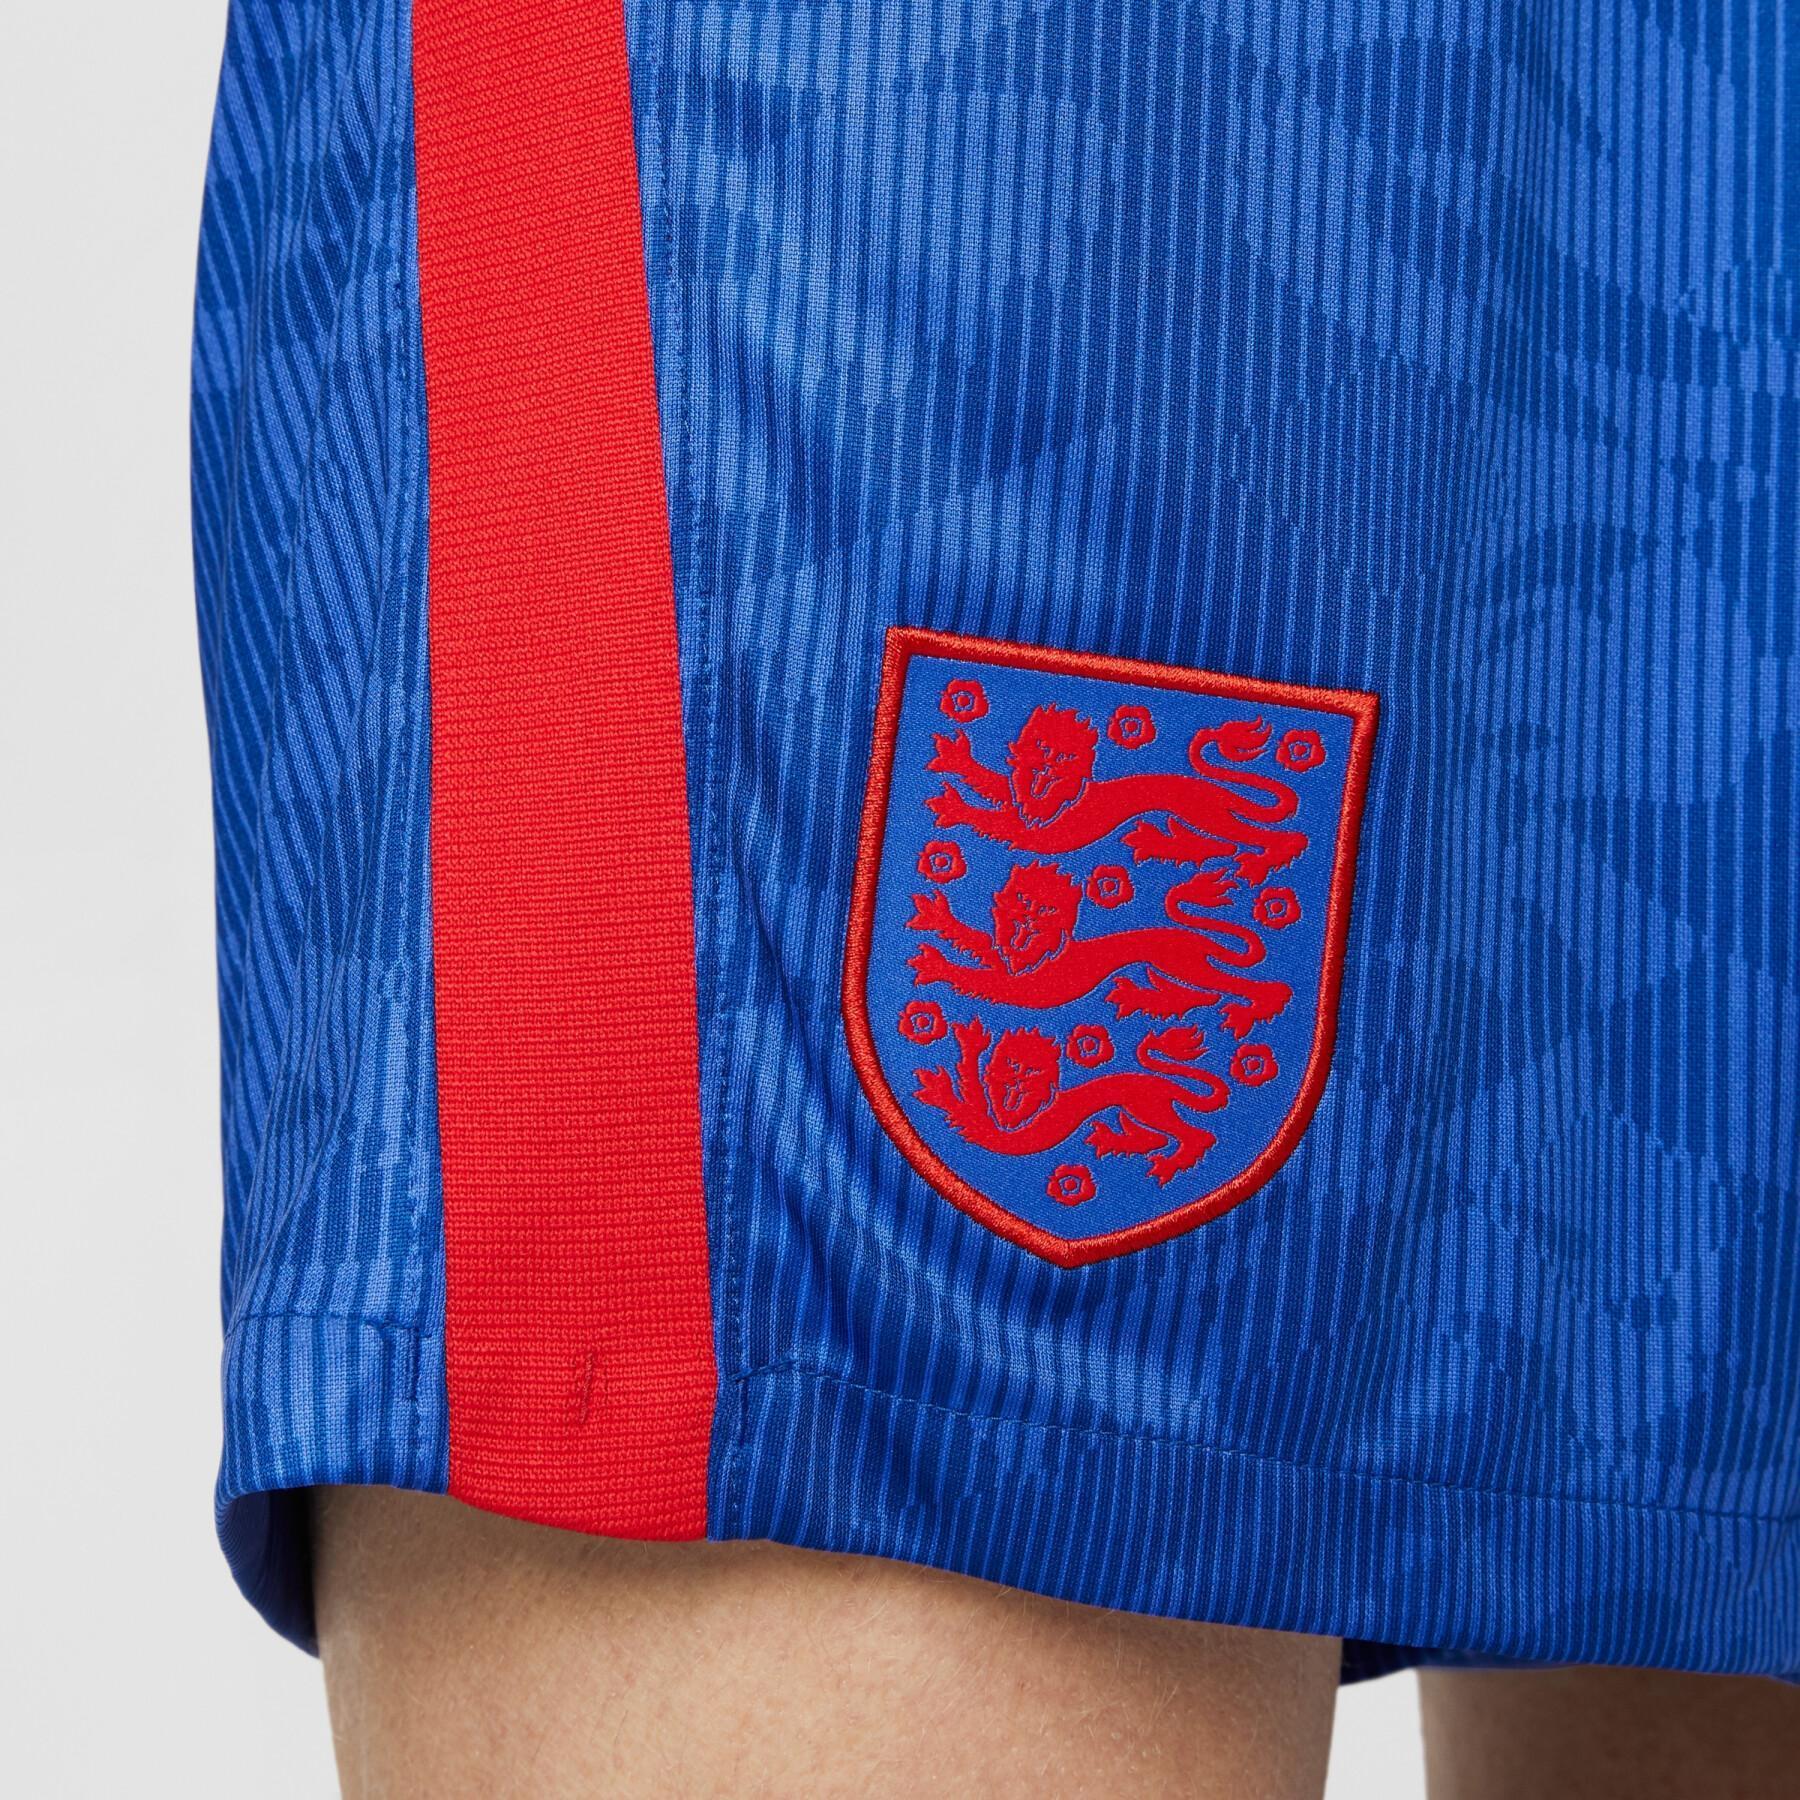 Outdoor shorts Angleterre 2020